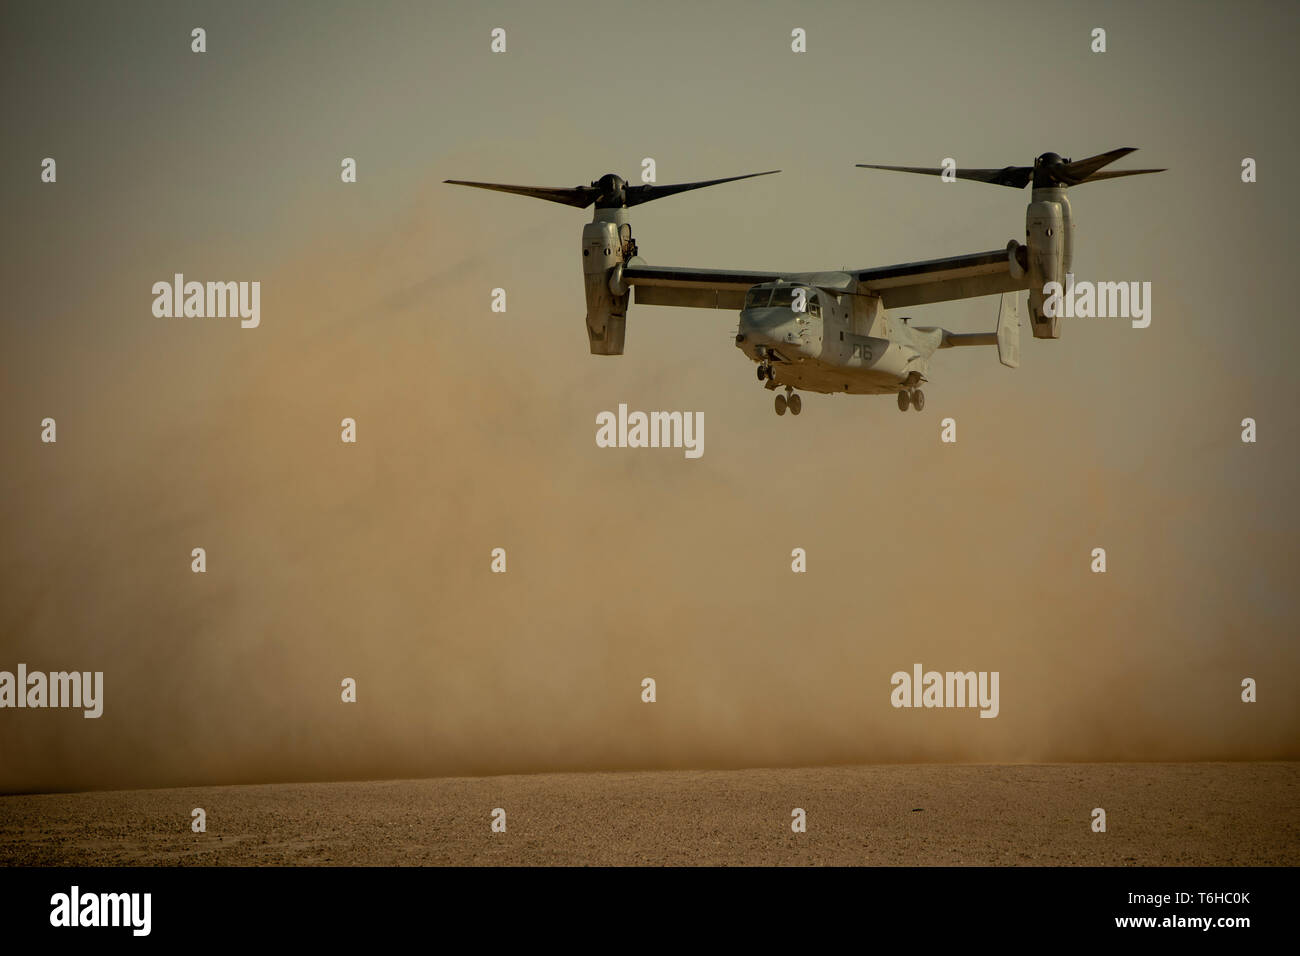 U.S. Marines with Marine Tilt Rotor Squadron 364, attached to Special Purpose Marine Air Ground Task Force Crisis Response-Central Command, land an MV-22 Osprey during a tactical recovery of aircraft and personnel exercise at Camp Buehring, Kuwait, April 28, 2019. The SPMAGTF-CR-CC is a multiple force provider designed to employ ground, logistics and air capabilities throughout the Central Command area of responsibility. (U.S. Marine Corps photo by Sgt. Justin Huffty)  Stock Photo